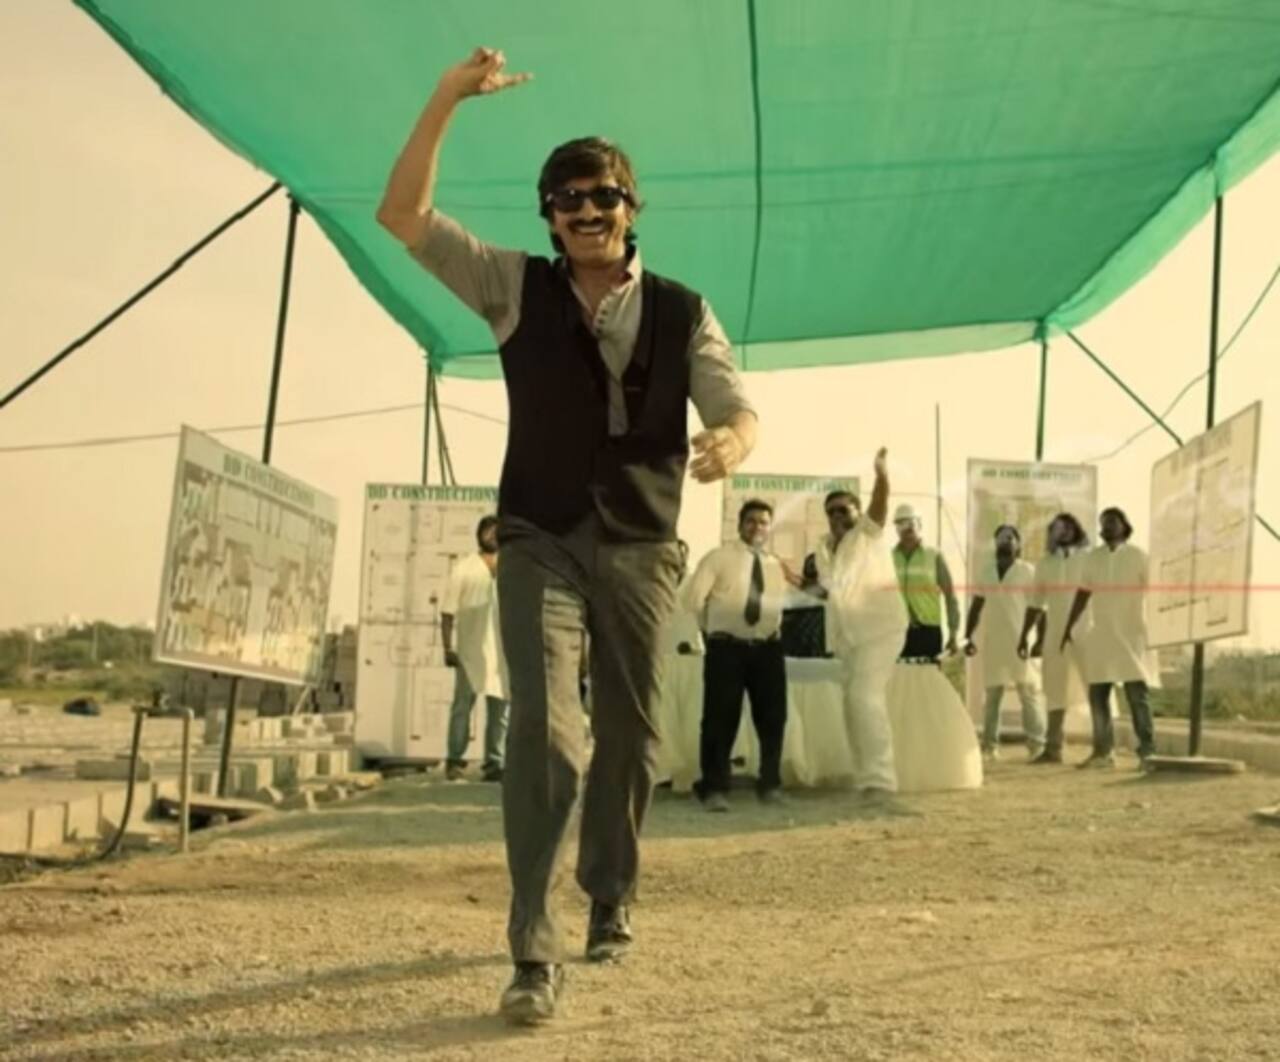 Kick 2 trailer: Ravi Teja packs punches and delivers punch lines in this typical masala entertainer!